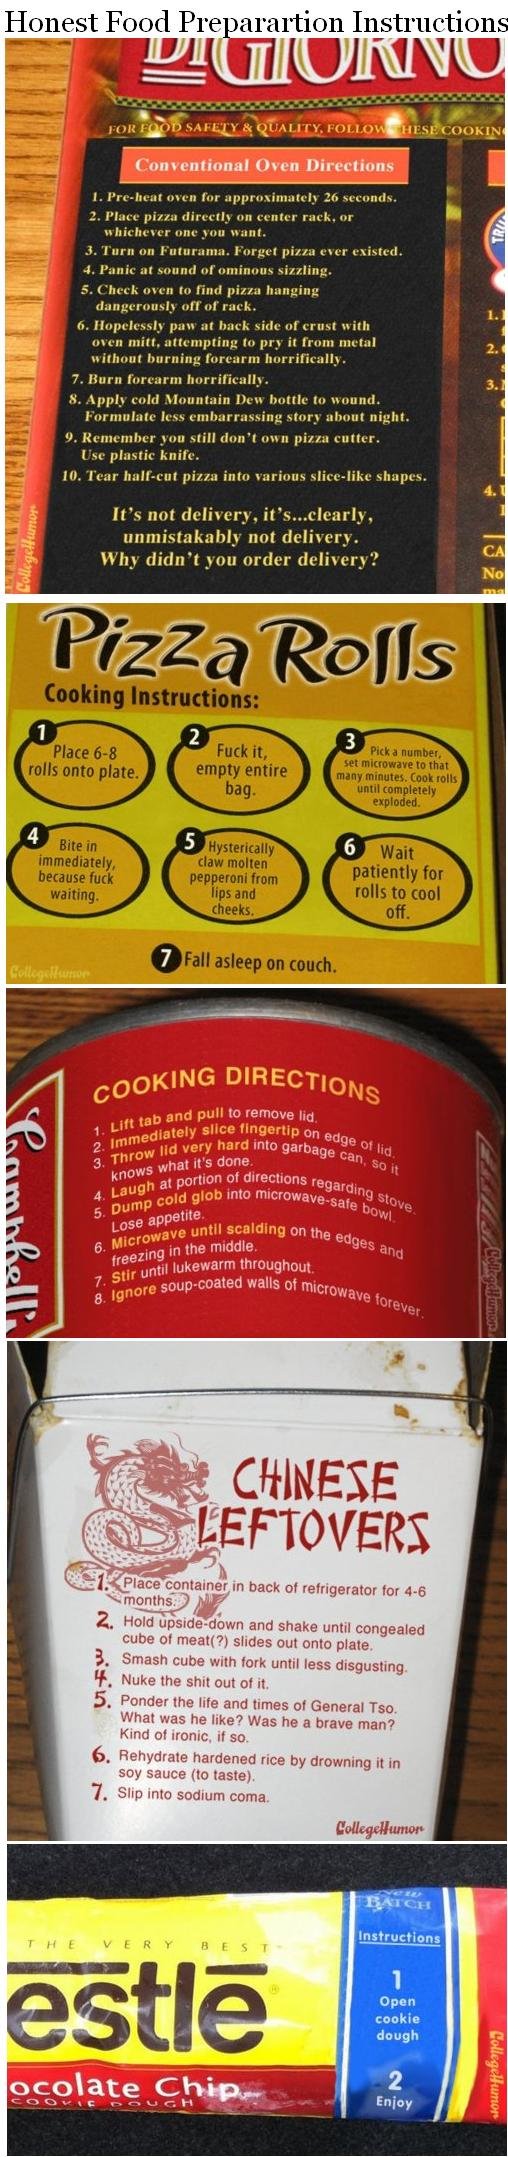 Honest Food Preparation Instructions. Found it on Tumblr, hope you like.. Conventional Oven Directions atolls, "ral NH Hf l. isak. I MI.‘ kirill. tattoist/ thrs